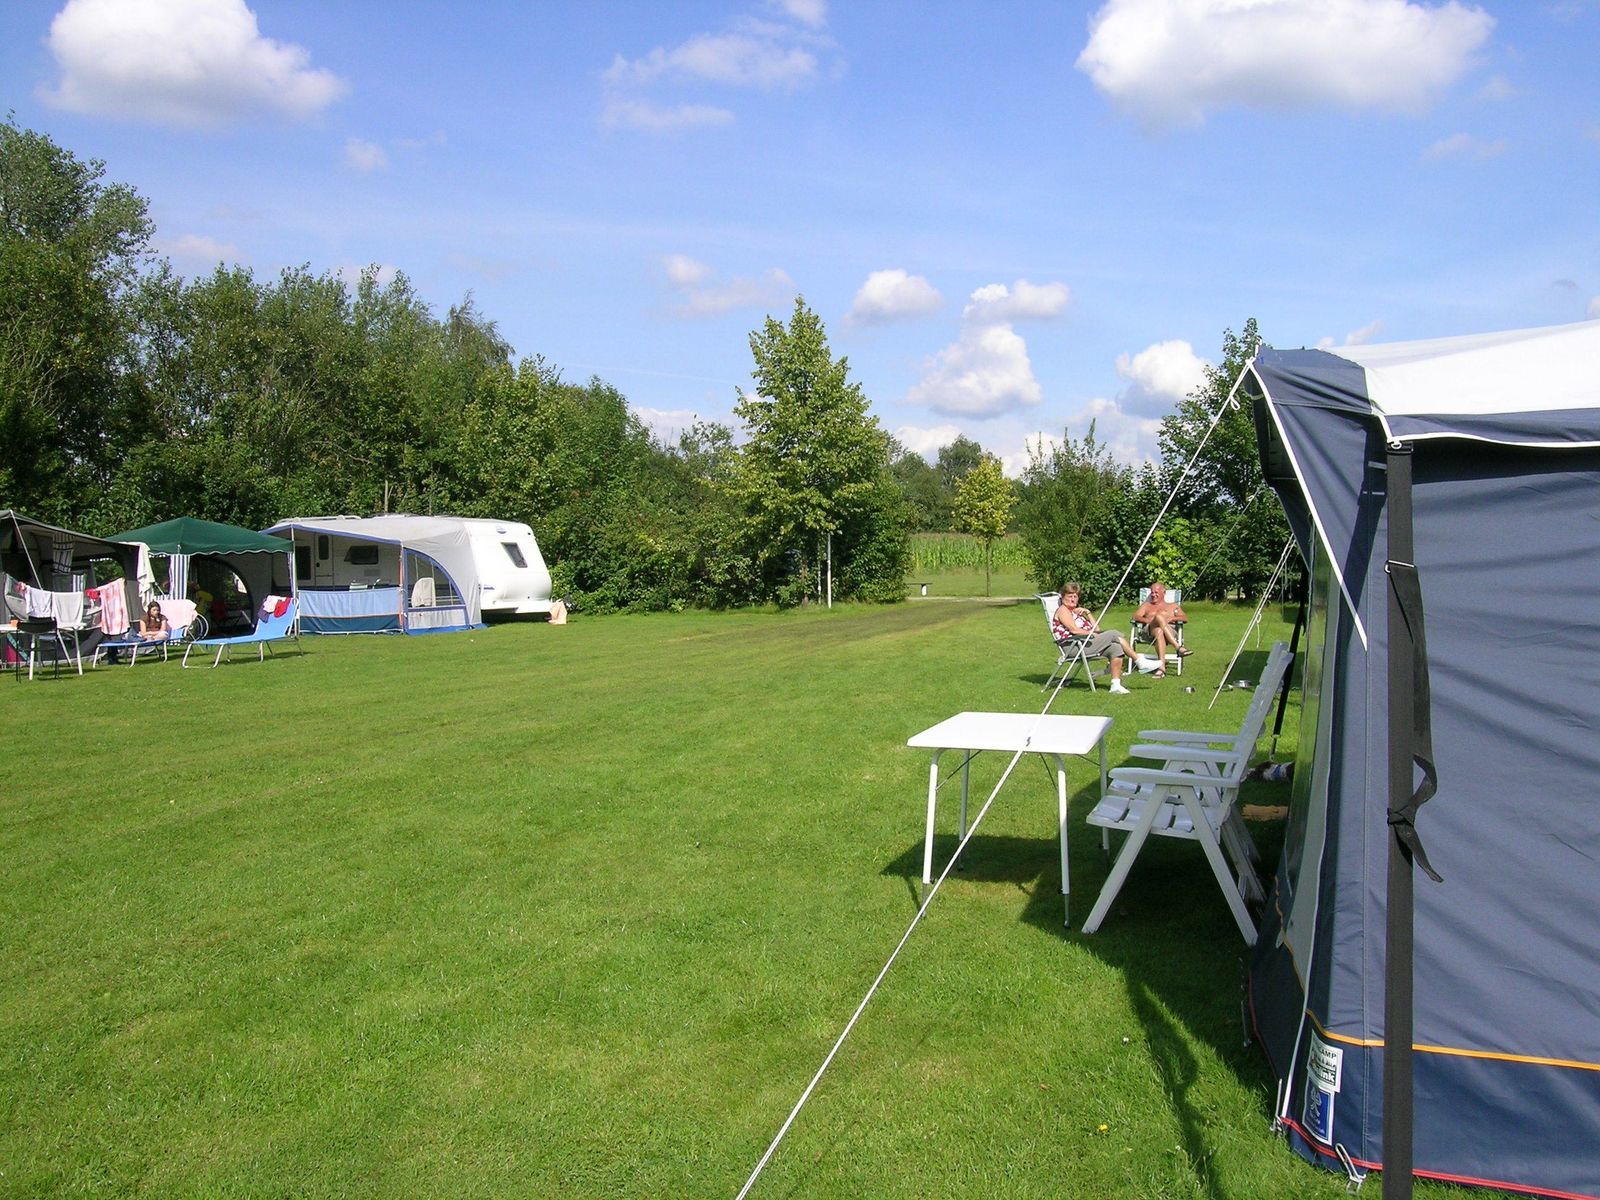 Camping pitch incl. 2 persons, excl. water/electricity